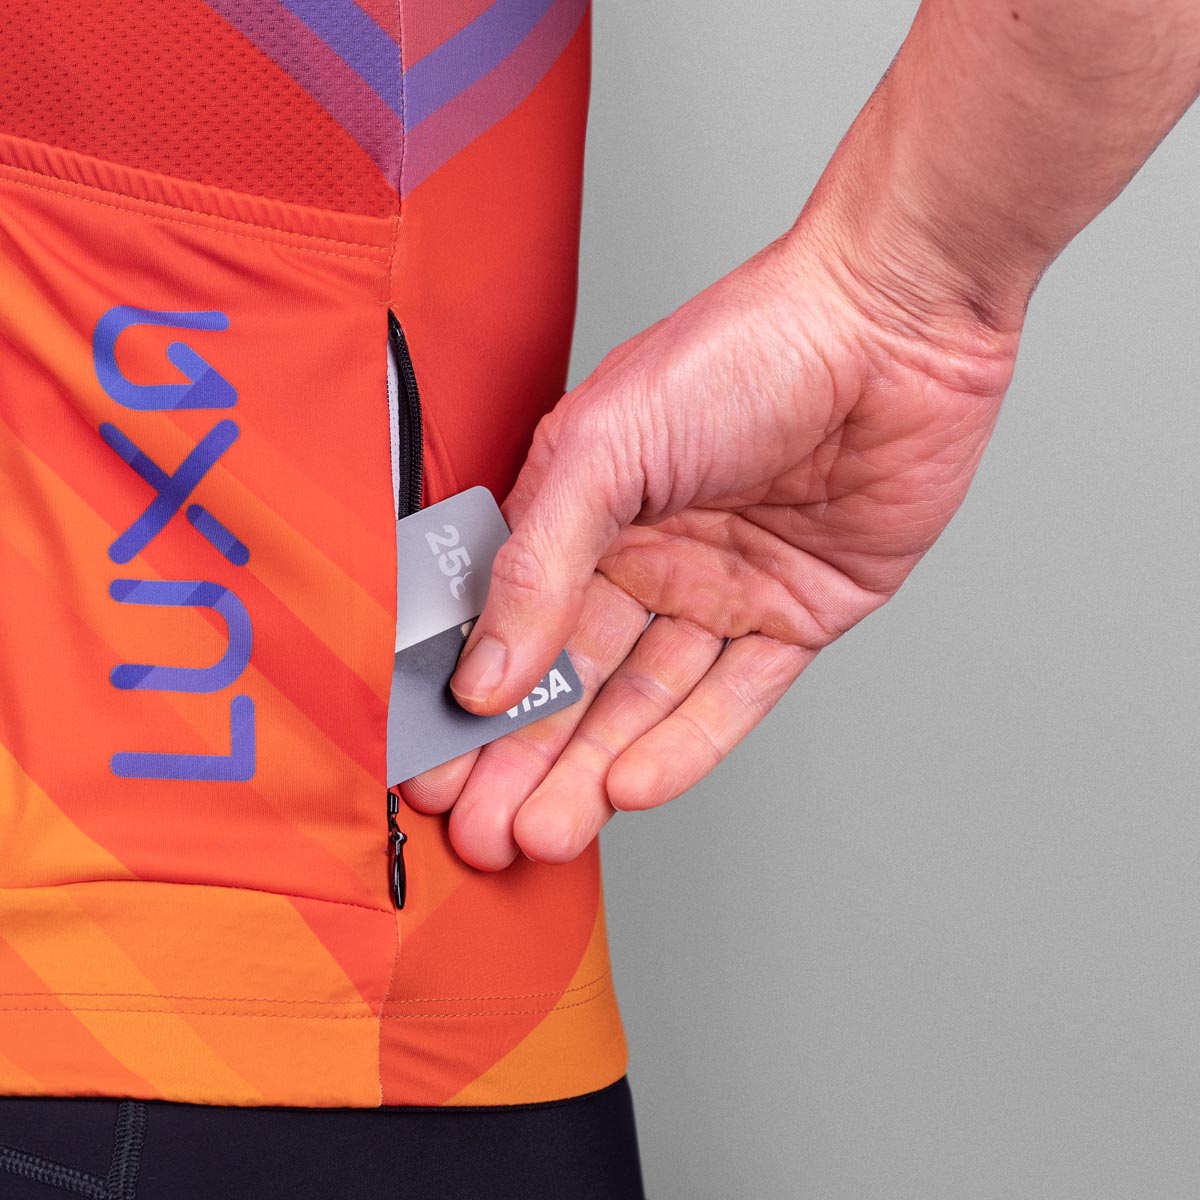 This cycling jersey features a dynamic design in shades of orange and blue, perfect for riders who want to stand out on the road.